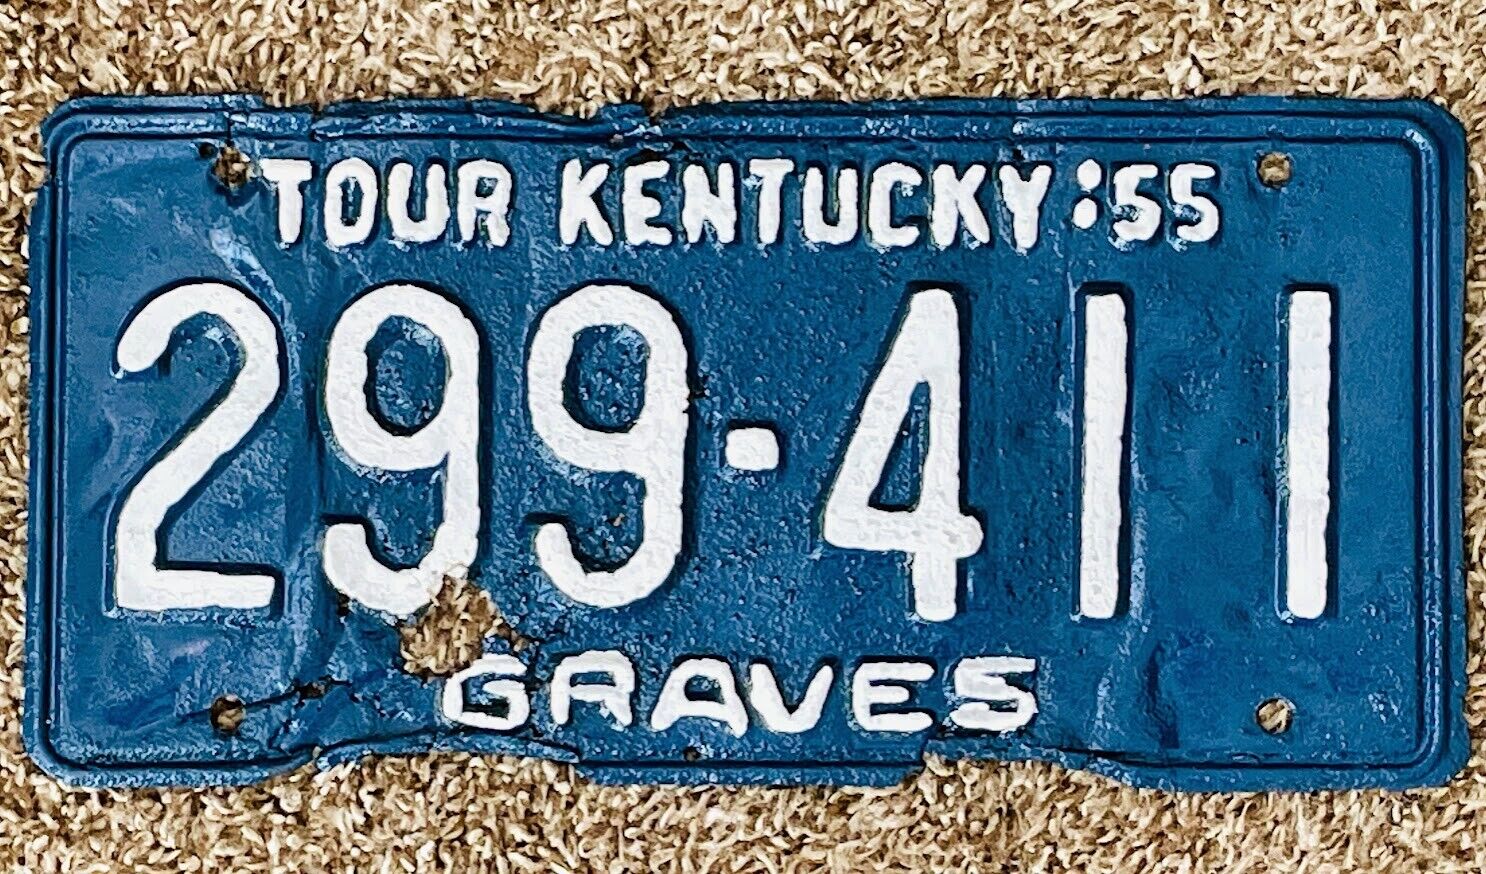 1955 KENTUCKY LICENSE PLATE Graves County KY RARE & HARD TO FIND YEAR